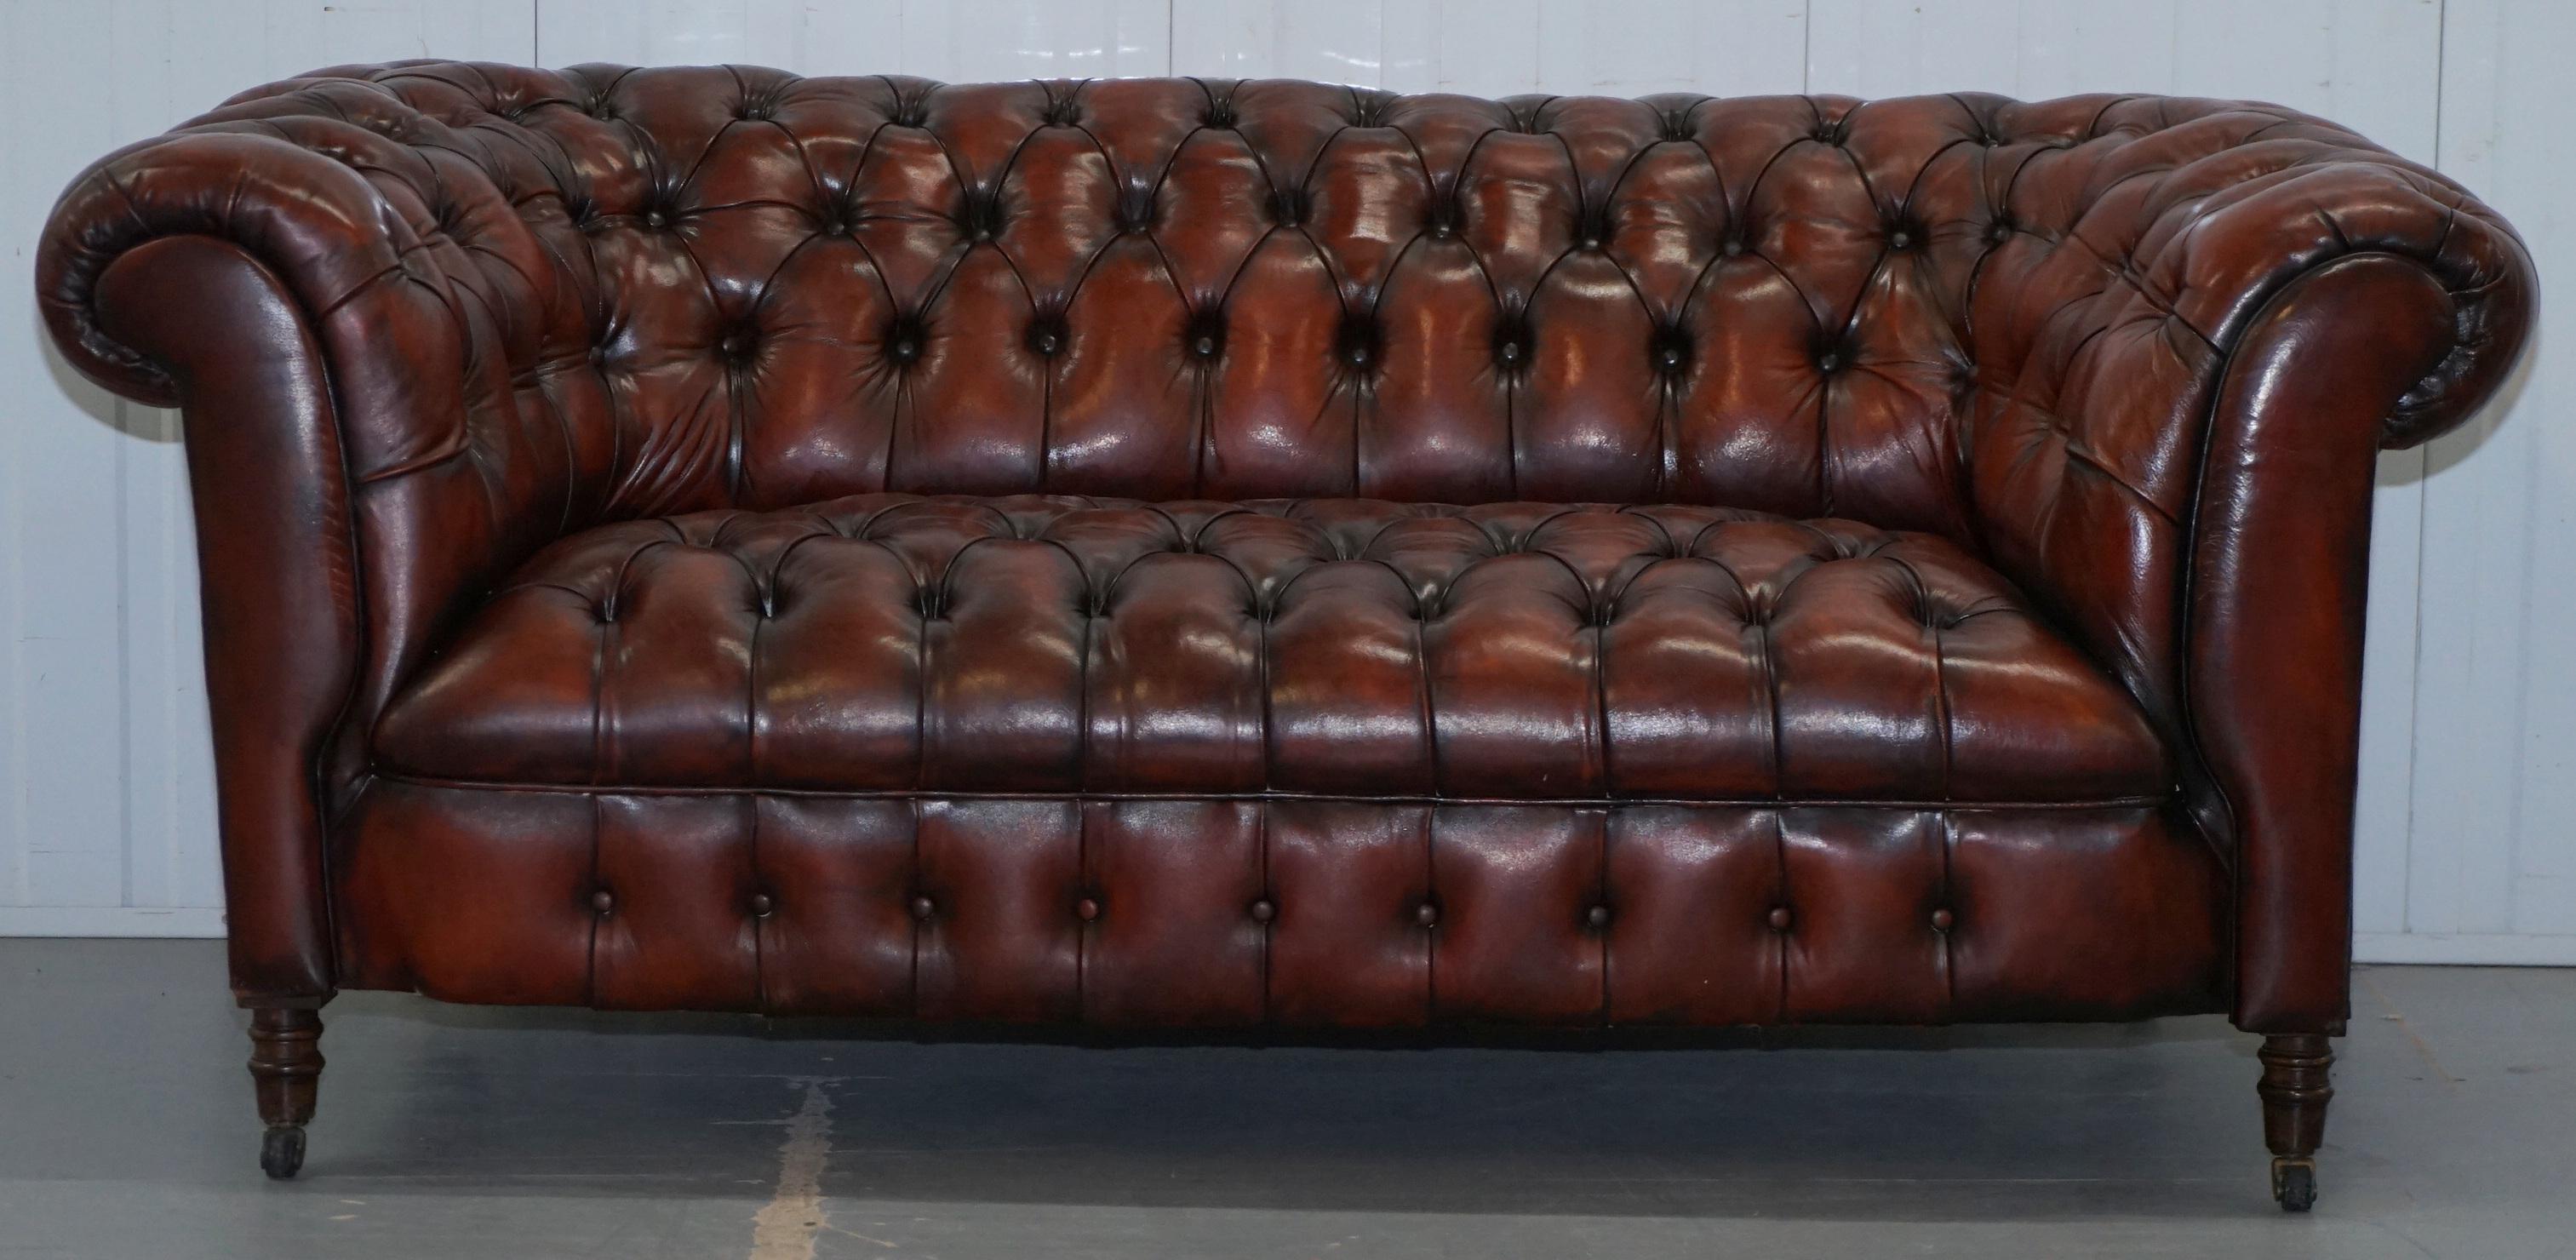 We are delighted to offer for sale this stunning fully restored Victorian circa 1880 hand dyed Chesterfield two-seat sofa with fully buttoned base
A very good looking piece, rare to find in this small width, they usually start from around 190cm